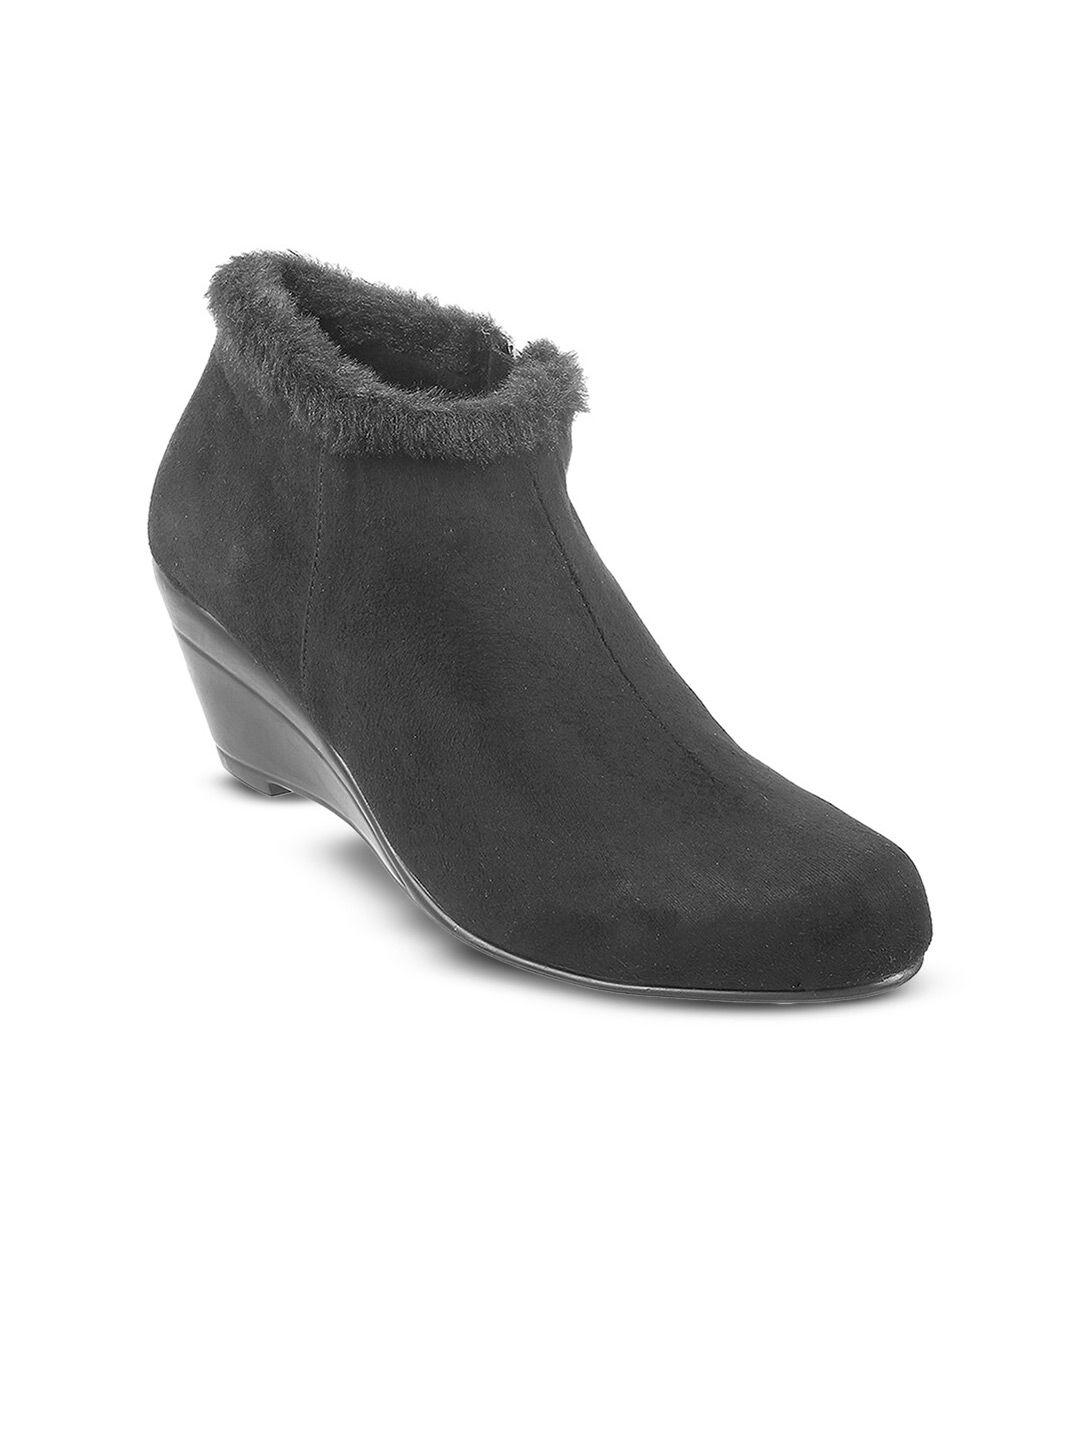 mochi round toe wedge heeled mid-top boots with faux fur trim detail